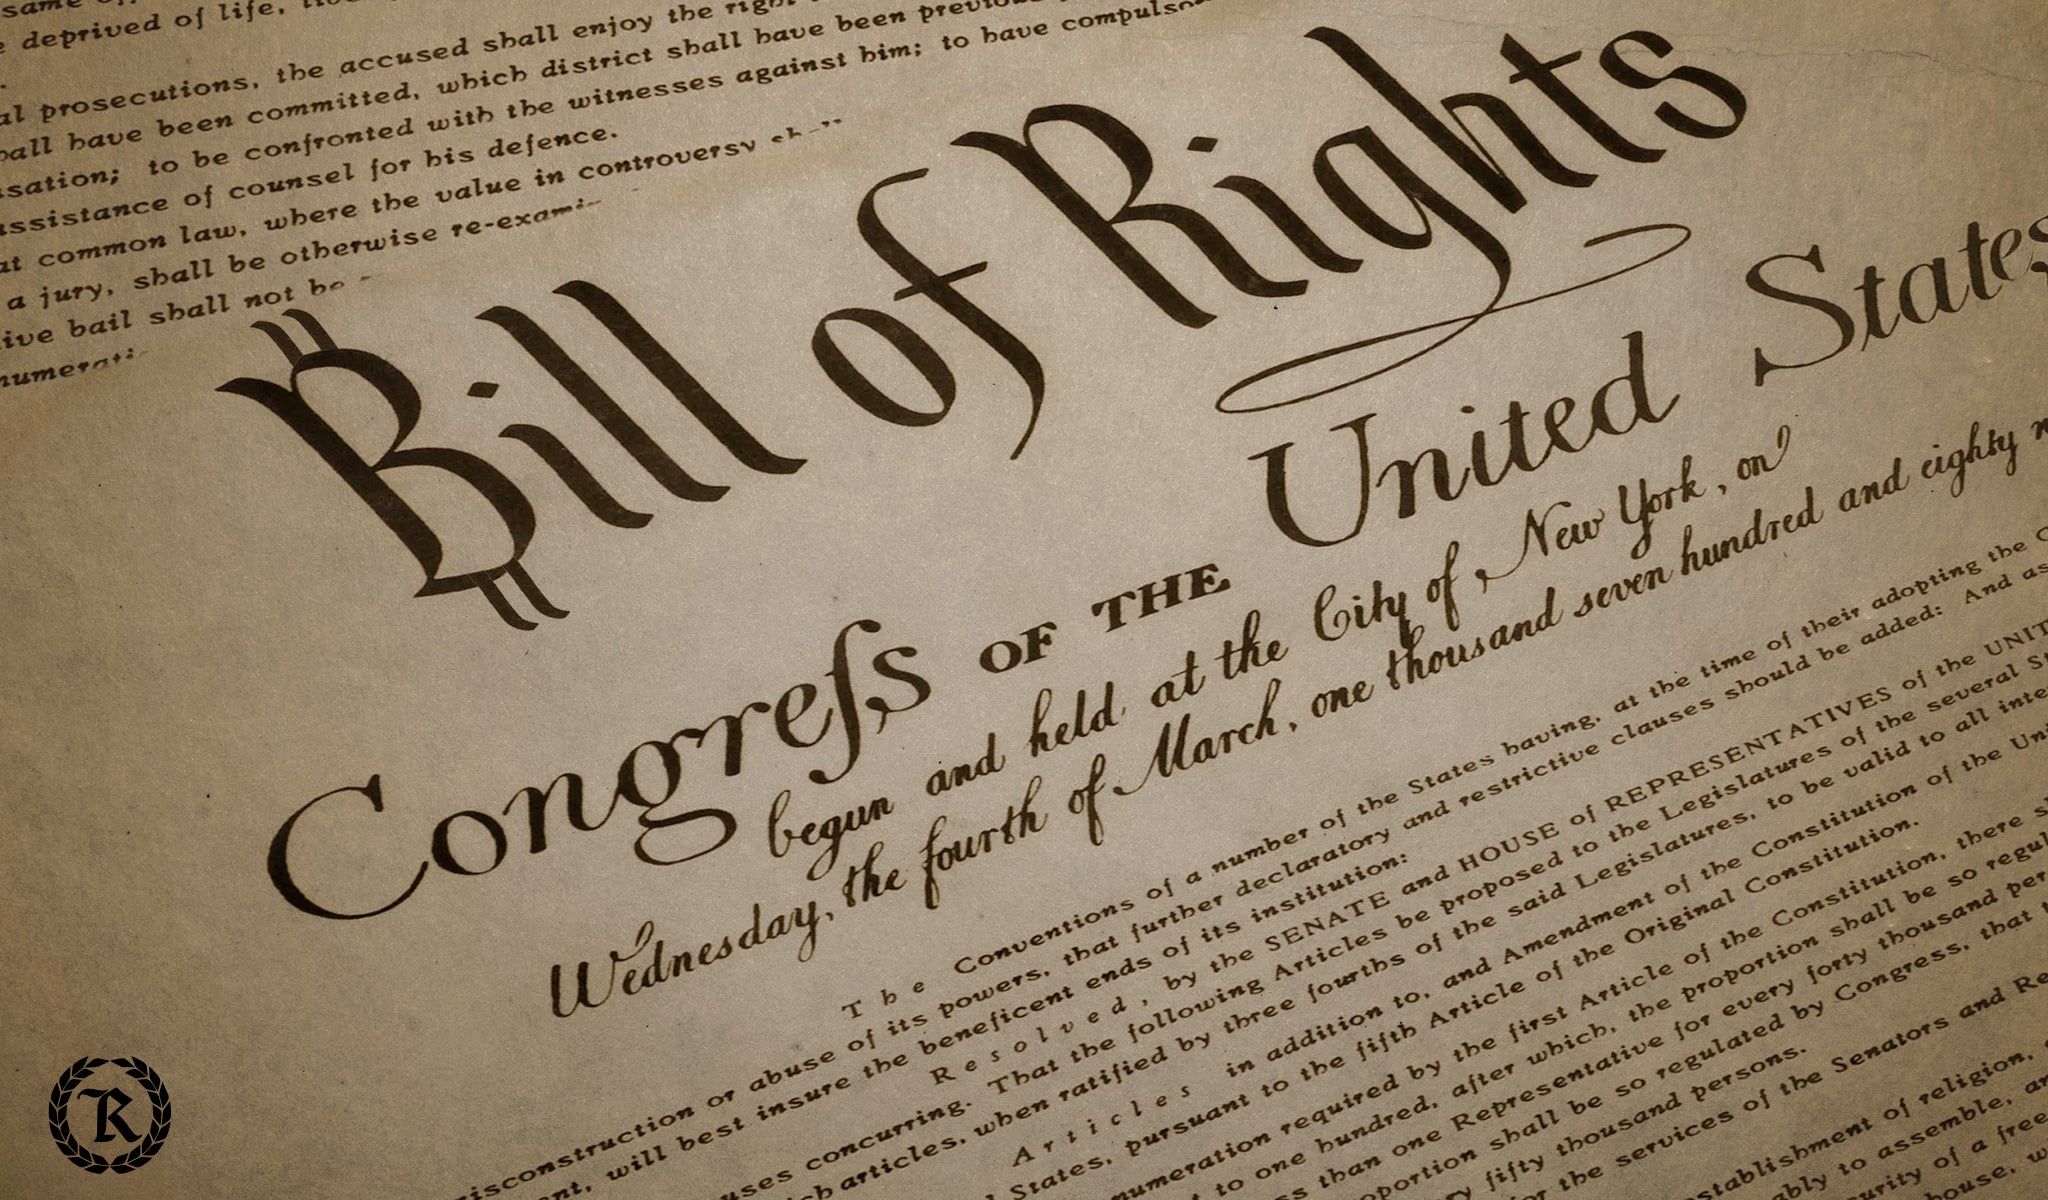 The United Decentralized States of America's Bill of Rights: BITCOIN STANDARD